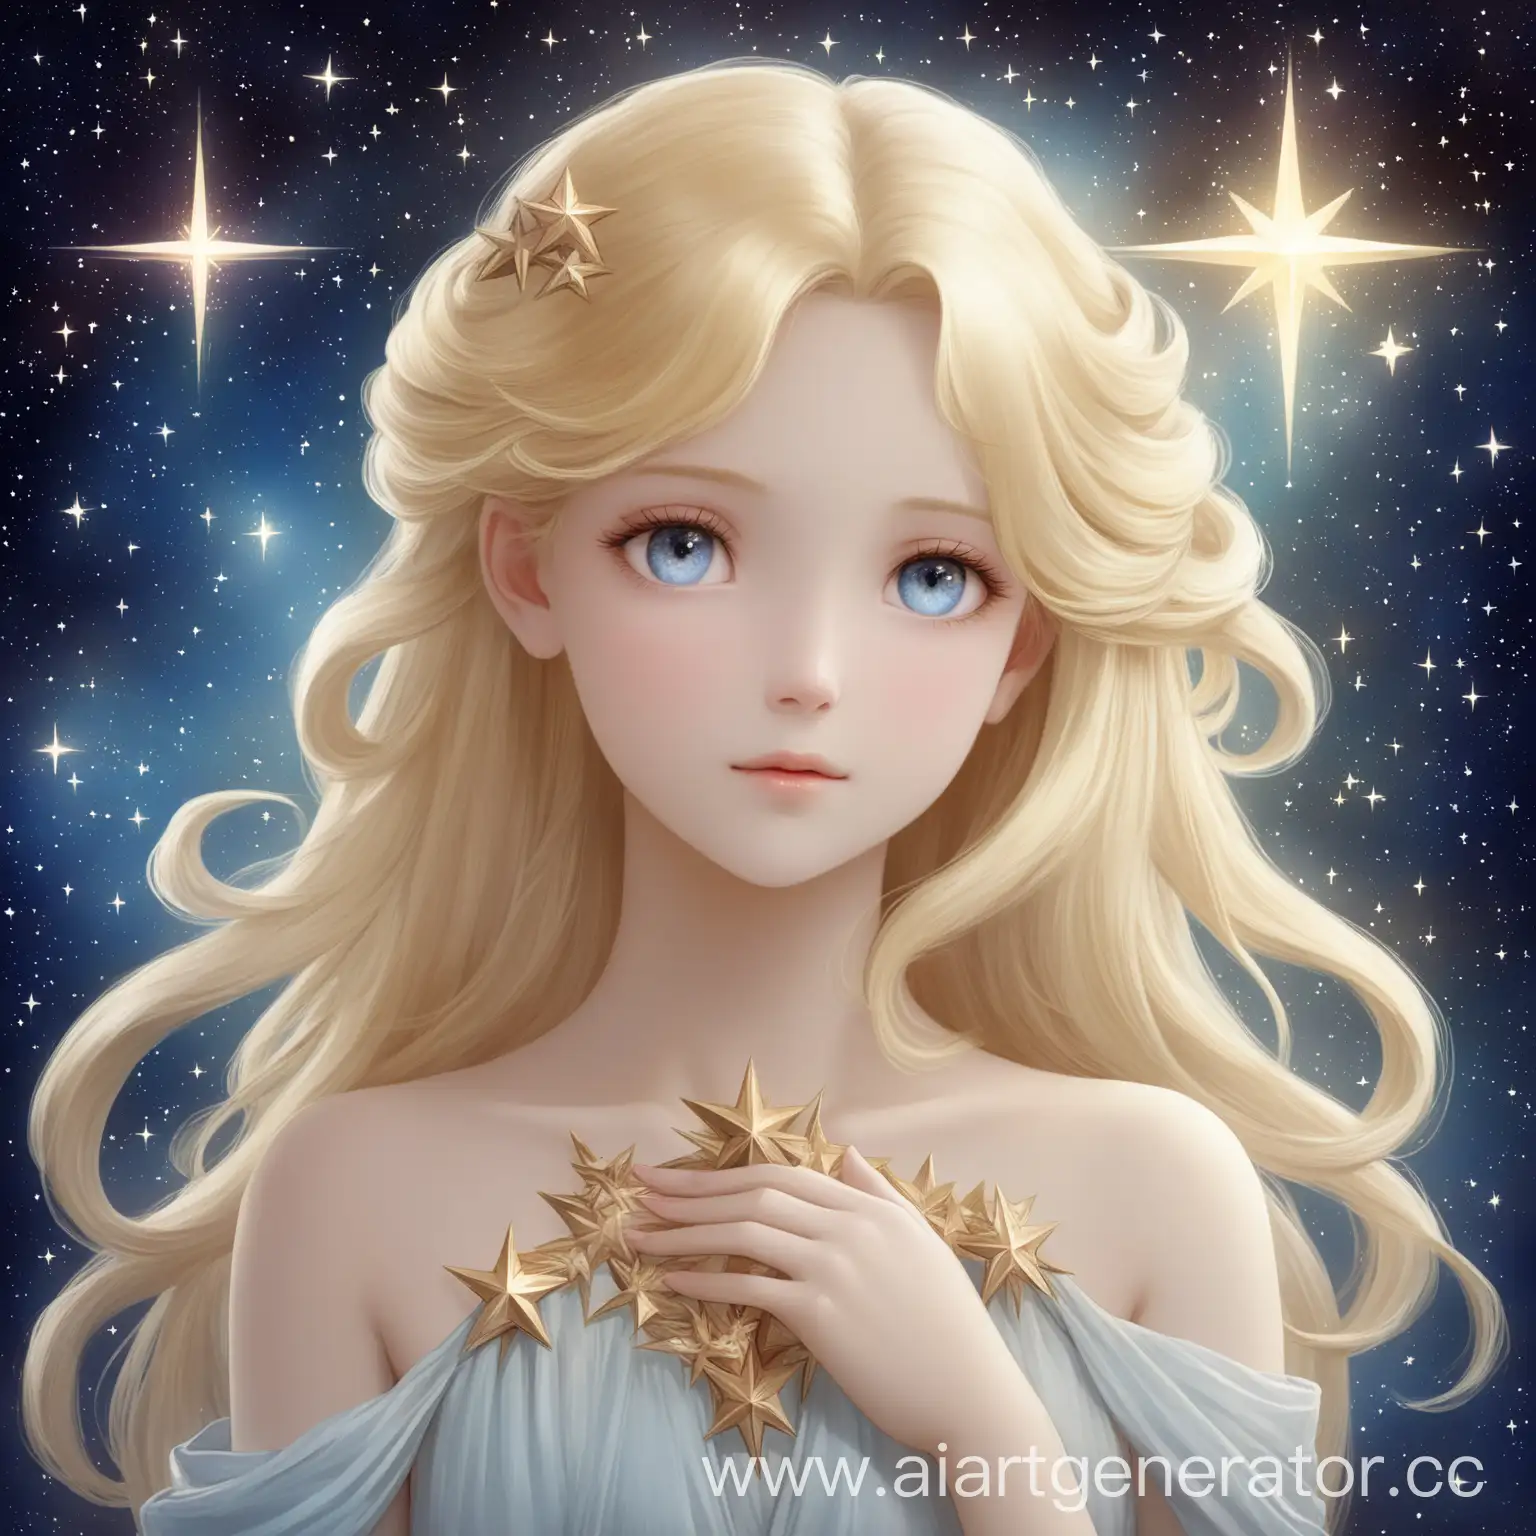 goddess of the stars. gentle girl with a soft, affectionate look and blond hair